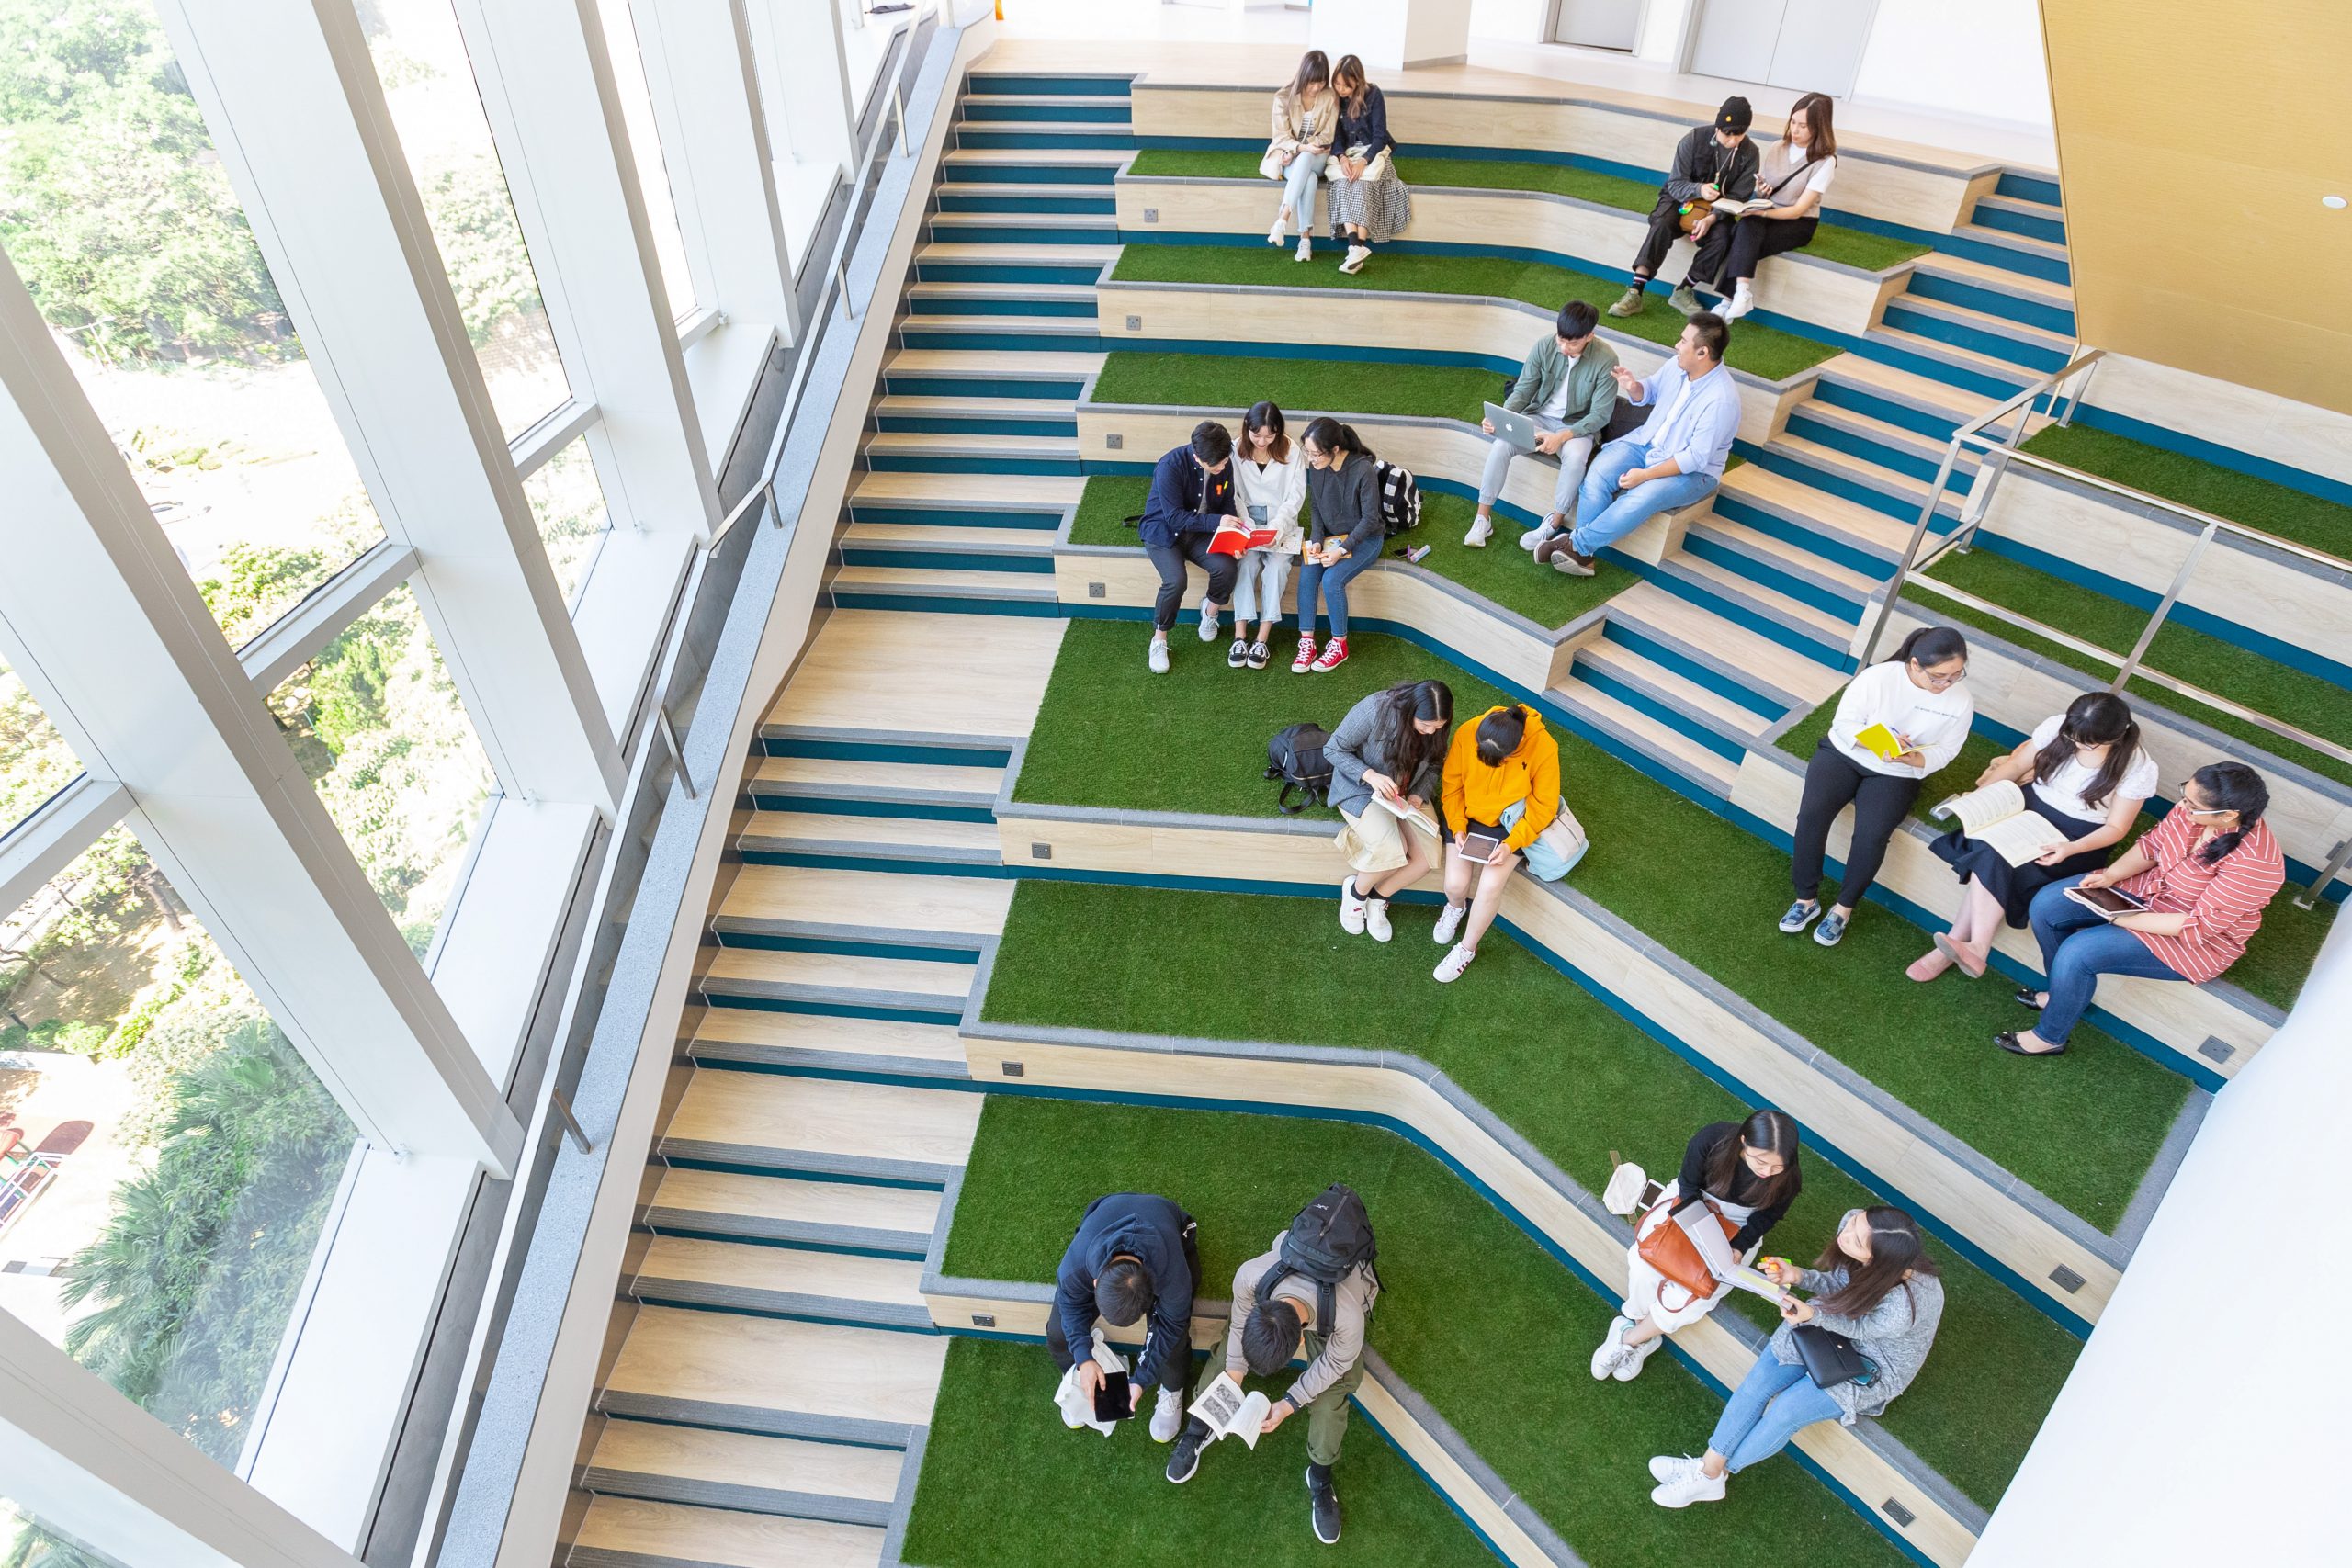 Connecting to different floors, the Academic Concourse is designed with high-ceiling curtain walls that allow ambient daylight to brighten up the area.